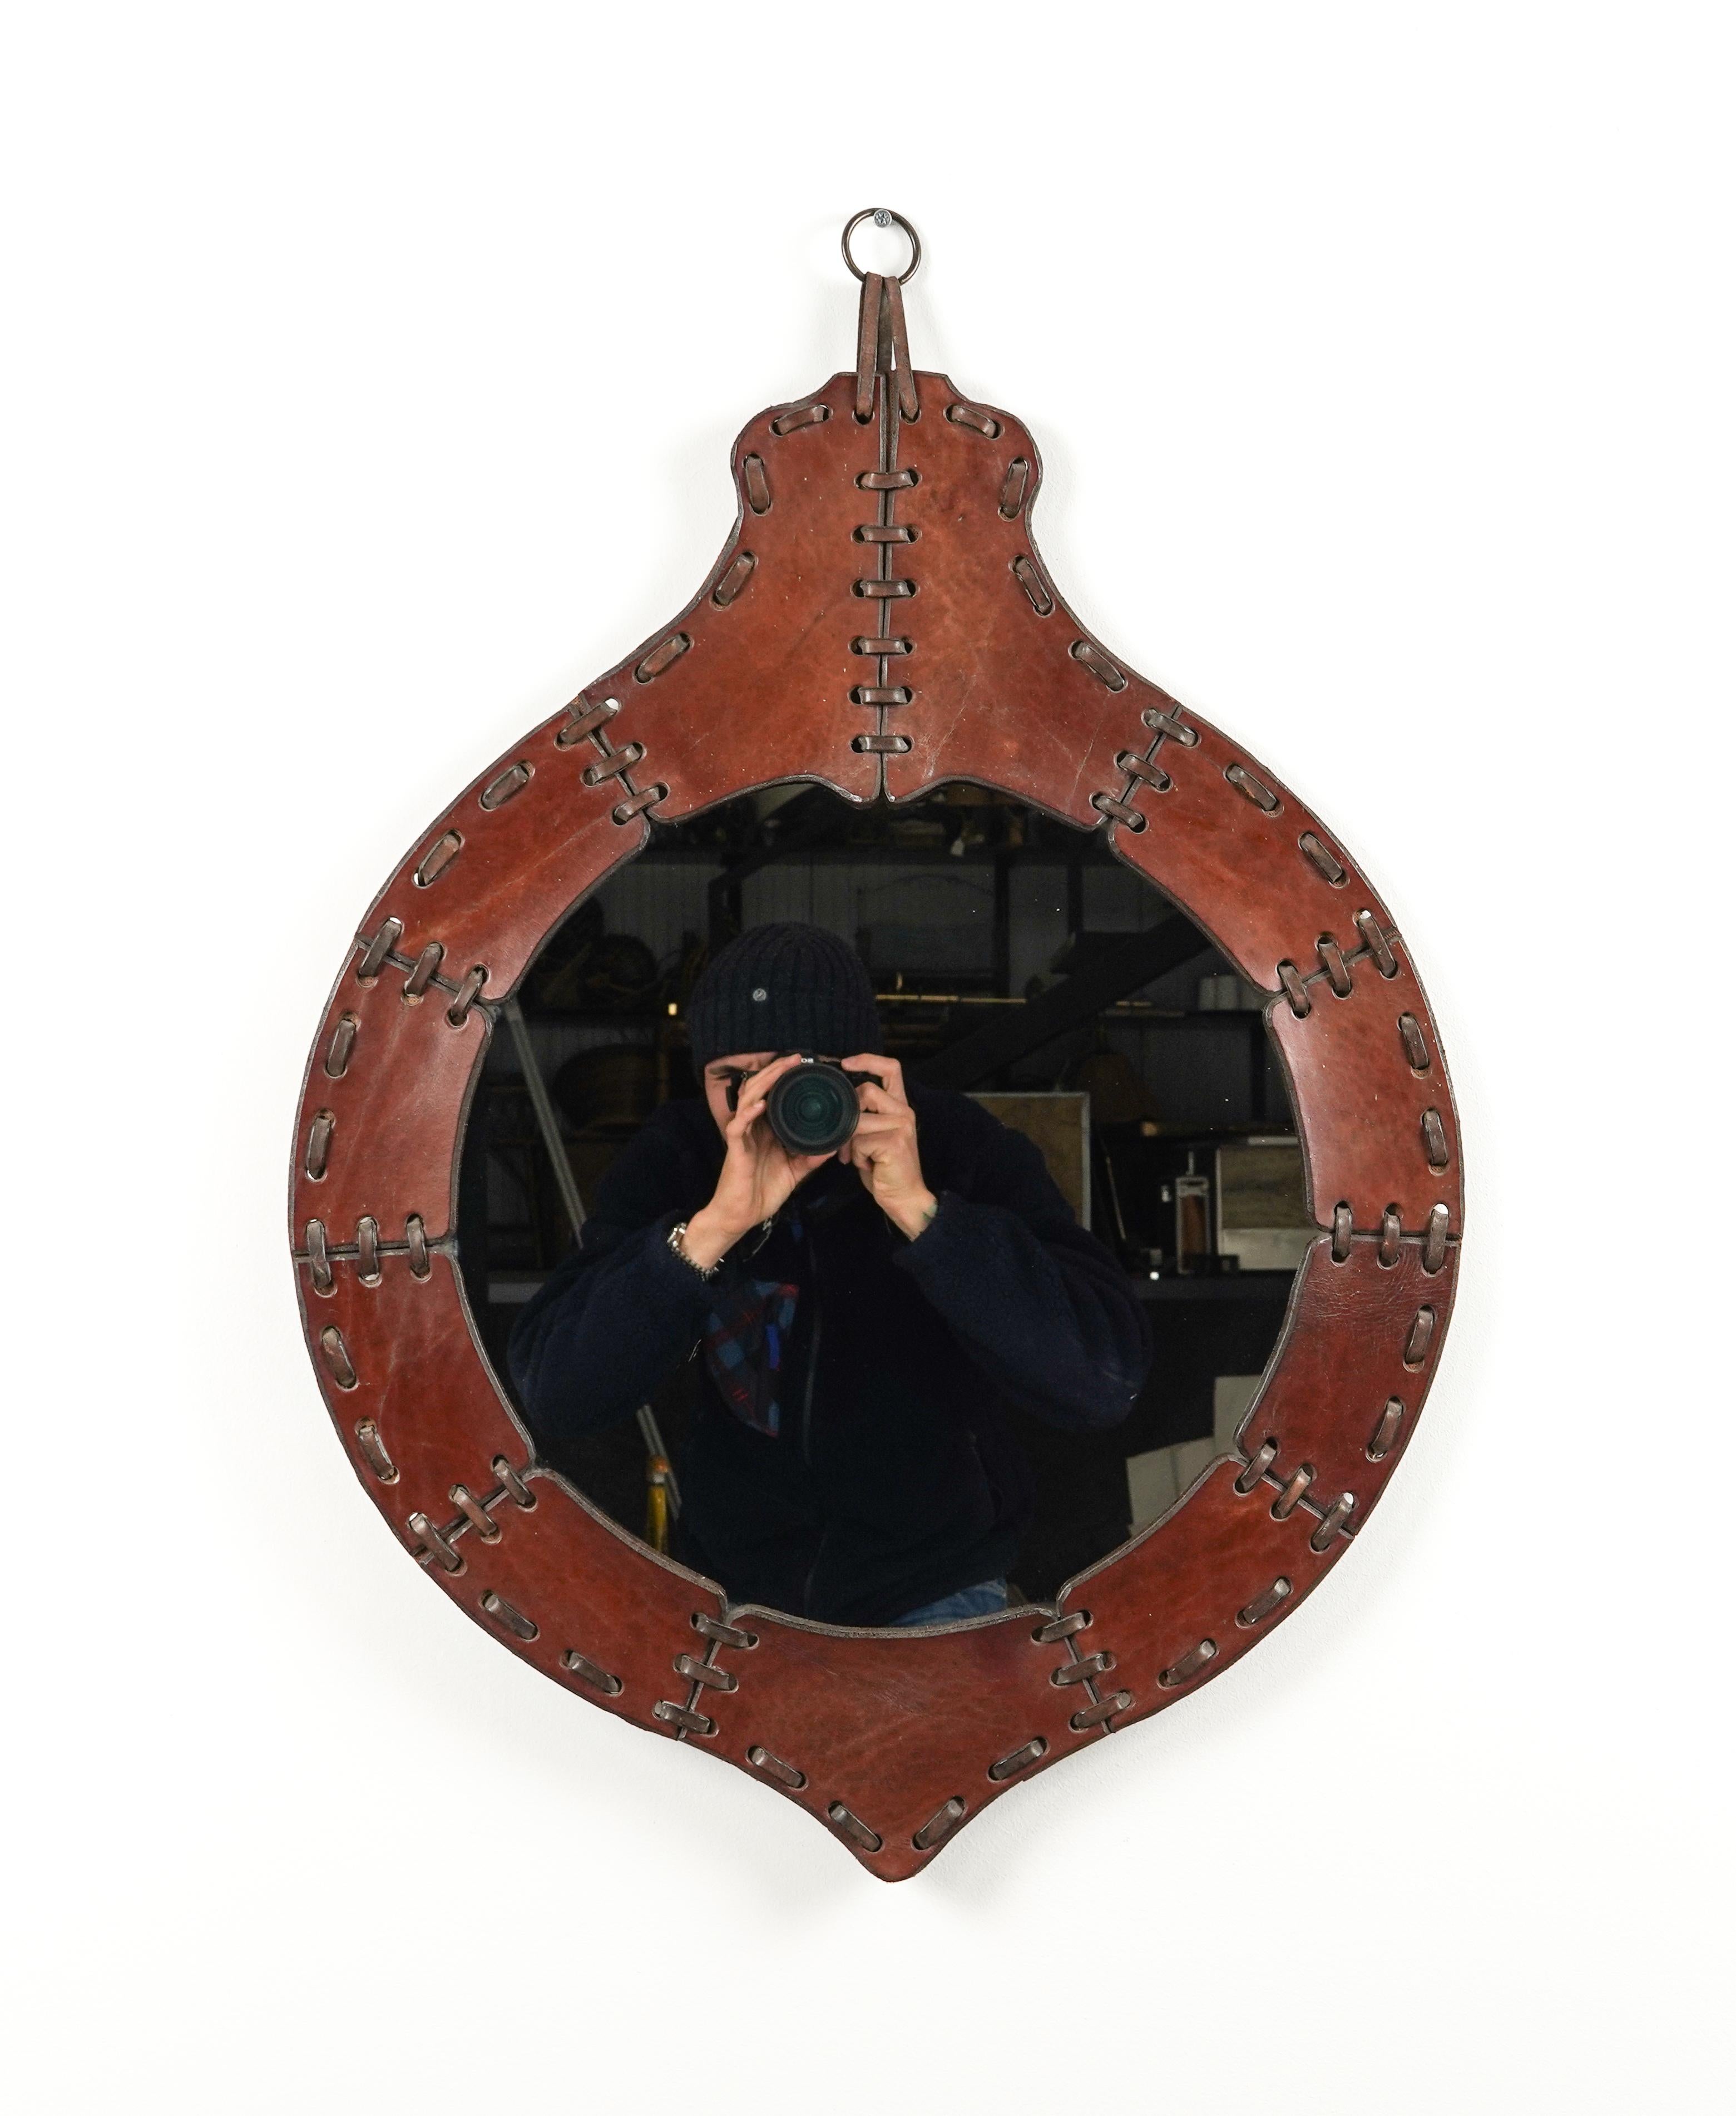 Midcentury Teardrop Wall Mirror in Leather, Italy 1960s For Sale 4